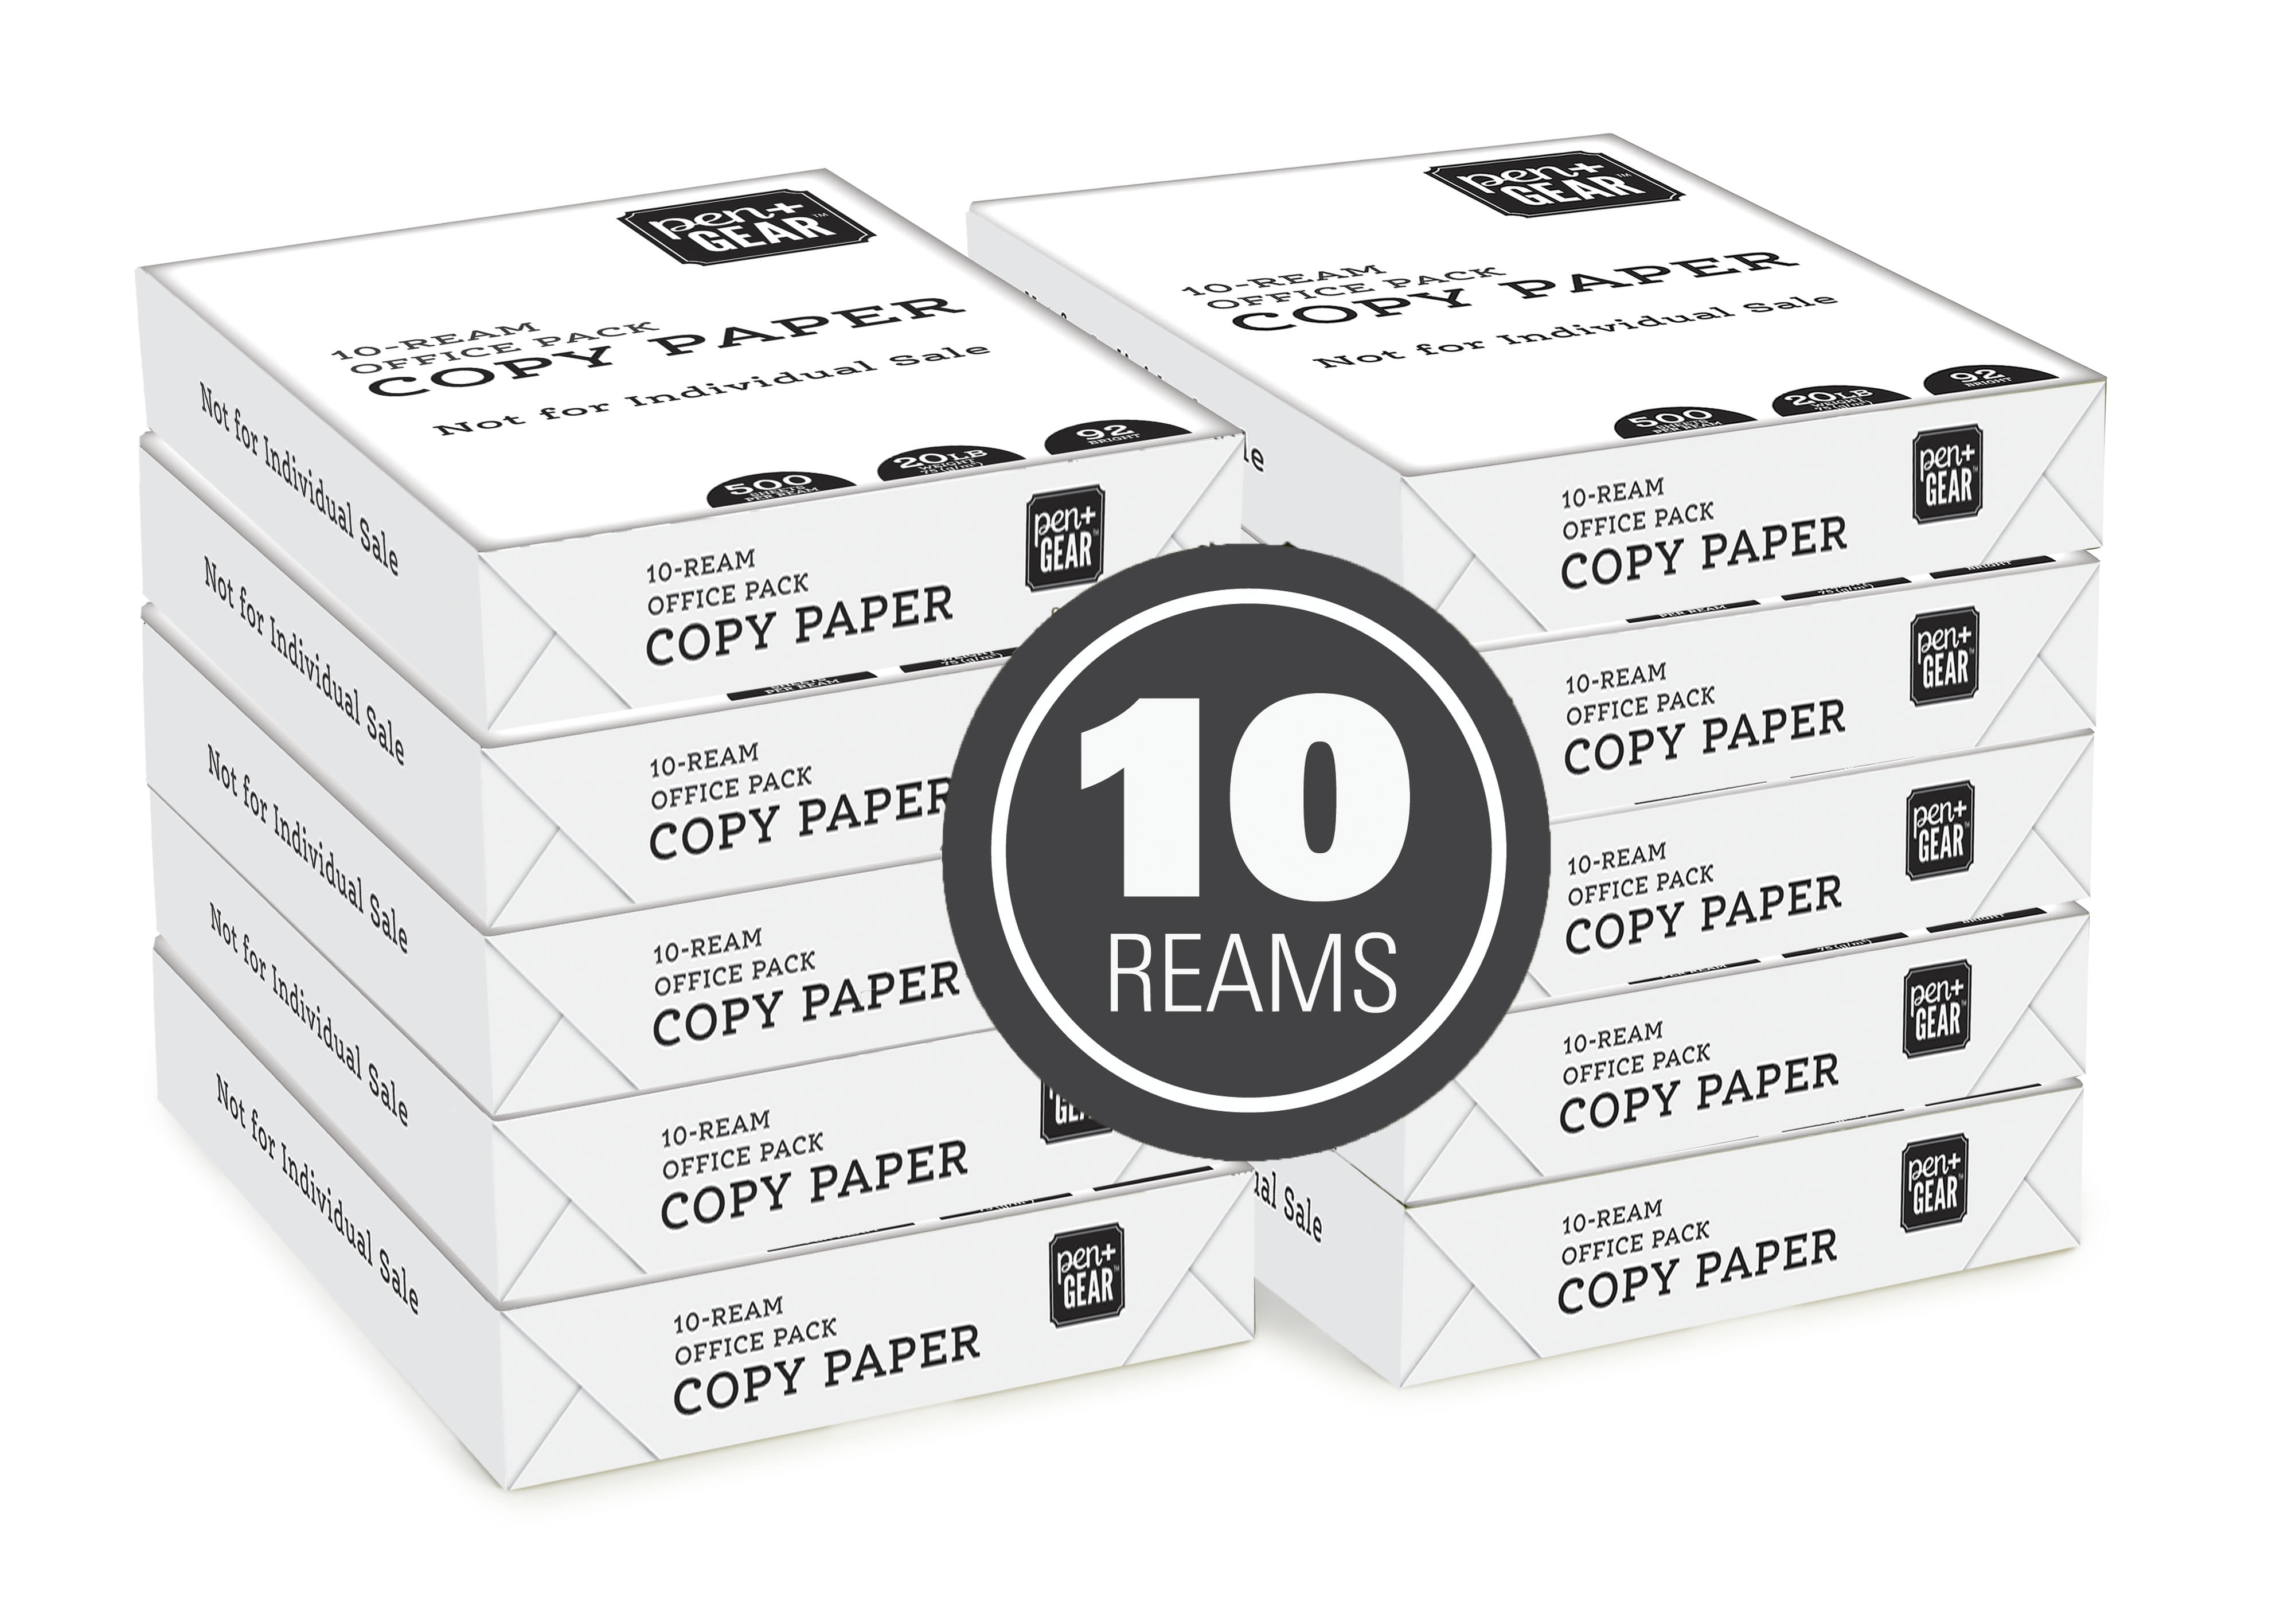 SKILCRAFT Xerographic Copier Paper Letter Size 8 12 x 11 5000 Total Sheets  92 U.S. Brightness 20 Lb 50percent Recycled White 500 Sheets Per Ream Case  Of 10 Reams AbilityOne 7530 01 398 2652 - Office Depot